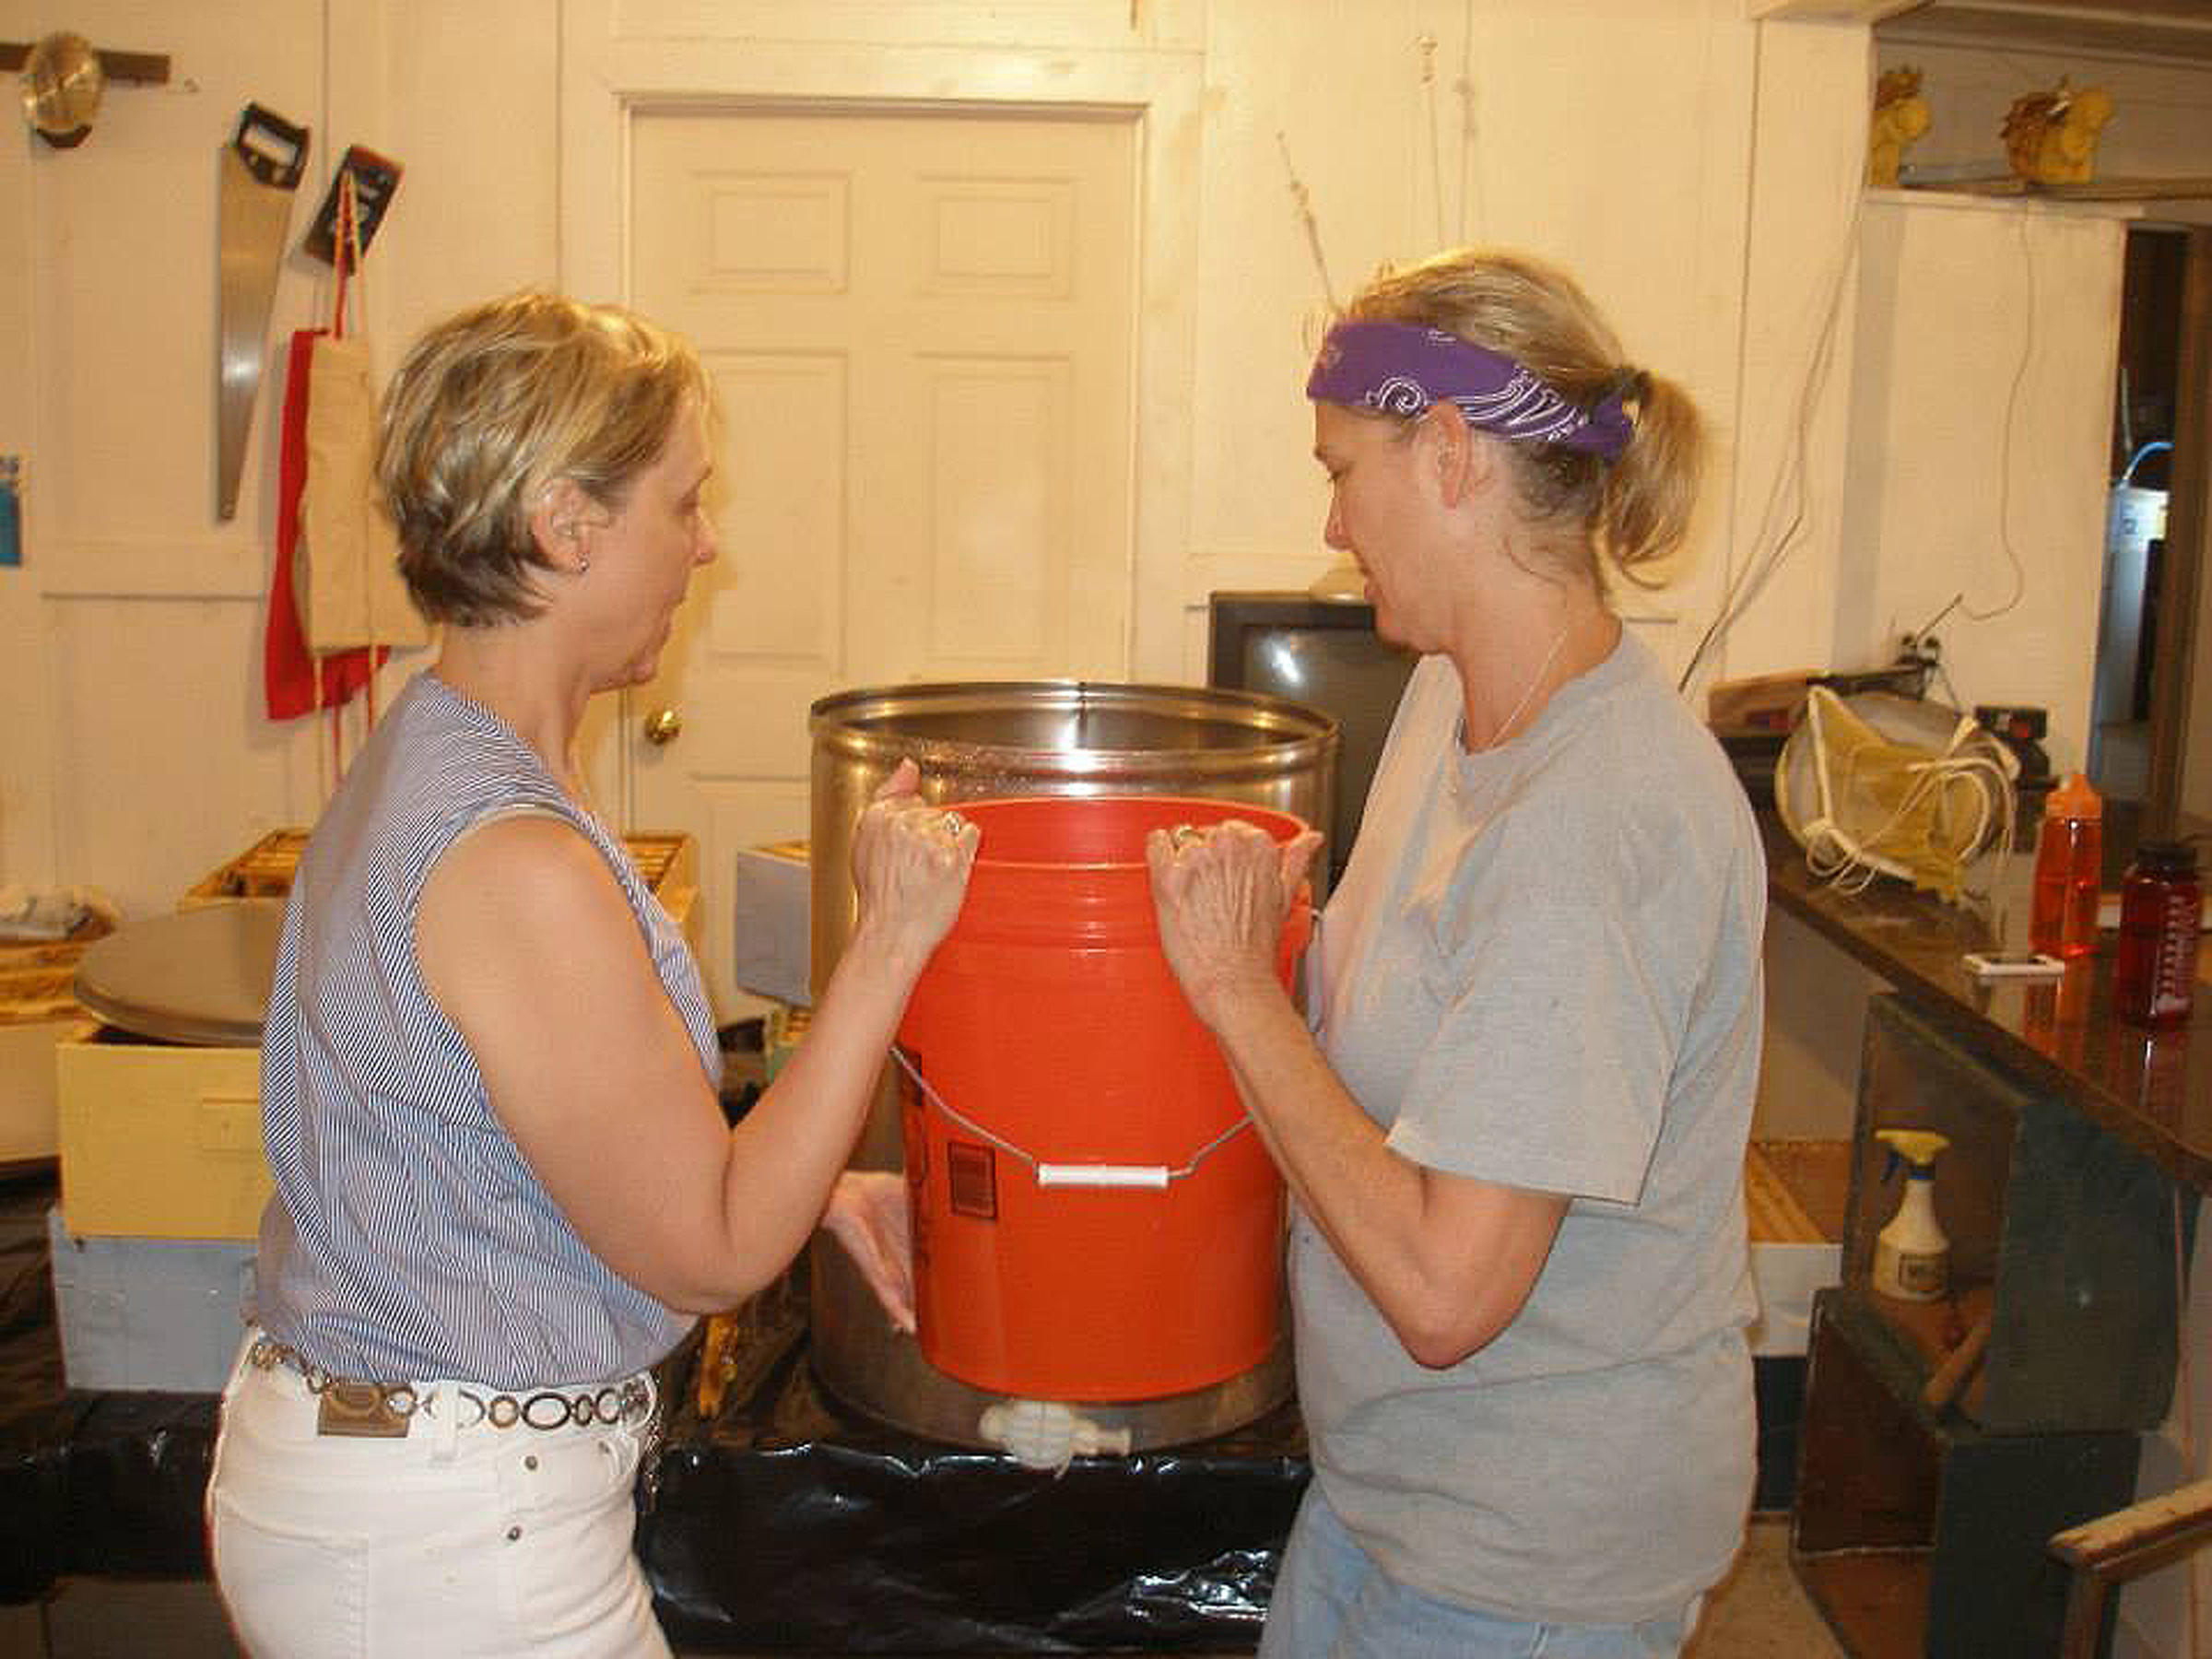 Transferring honey from the straining bucket into the holding tank.  This is where the honey will sit for about 48 hours to allow air bubbles to rise to the top in preparation for bottling.